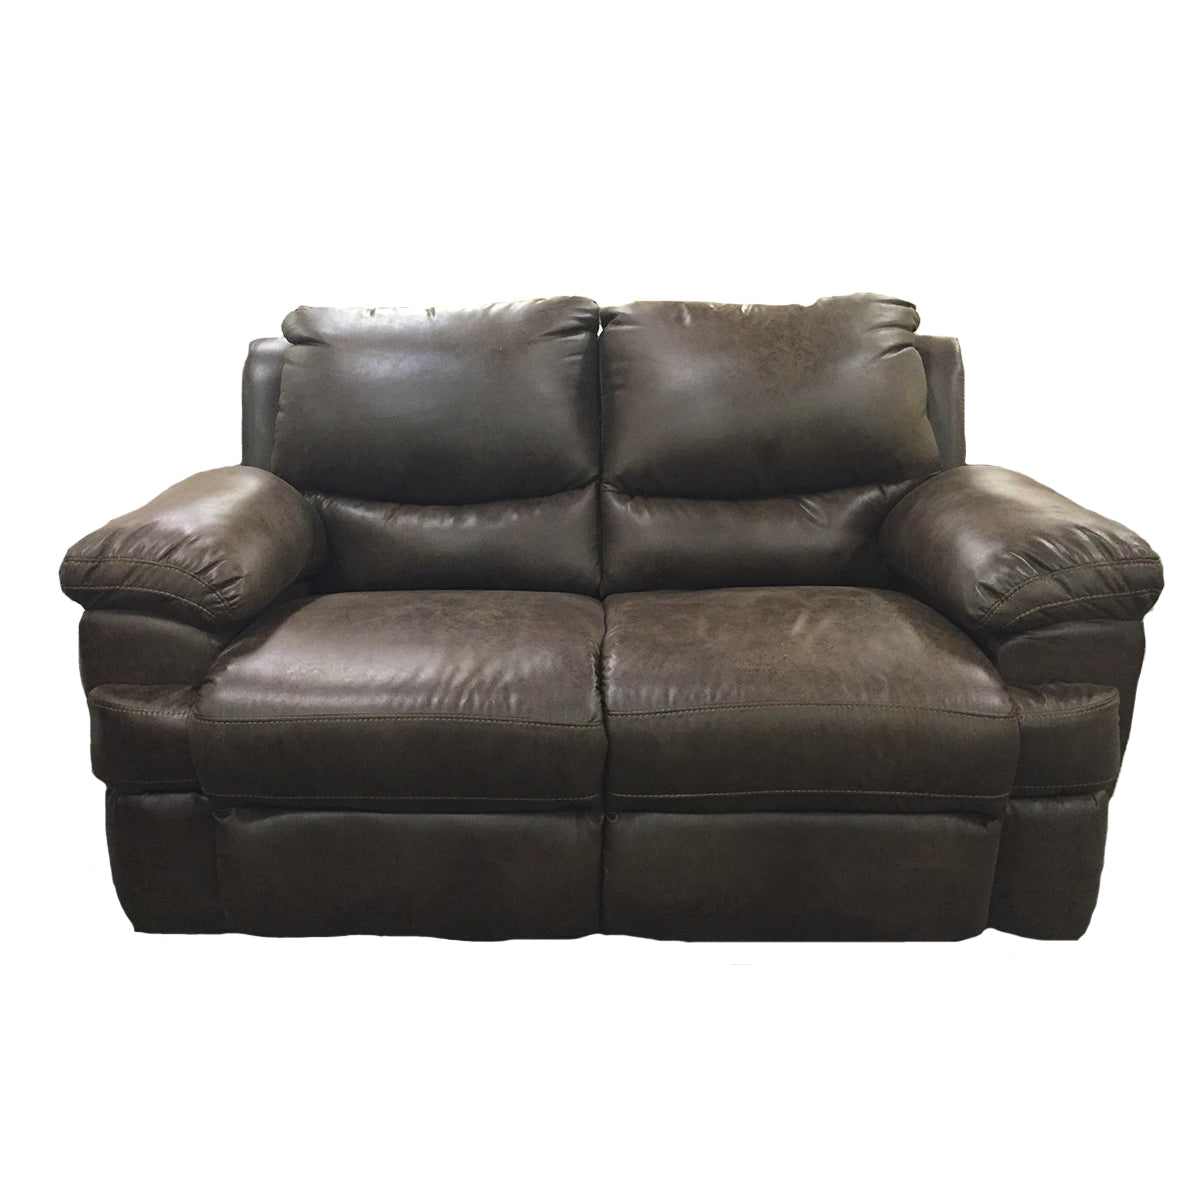 LOVE SEAT RECLINABLE MINELLI MONTANA CAFE